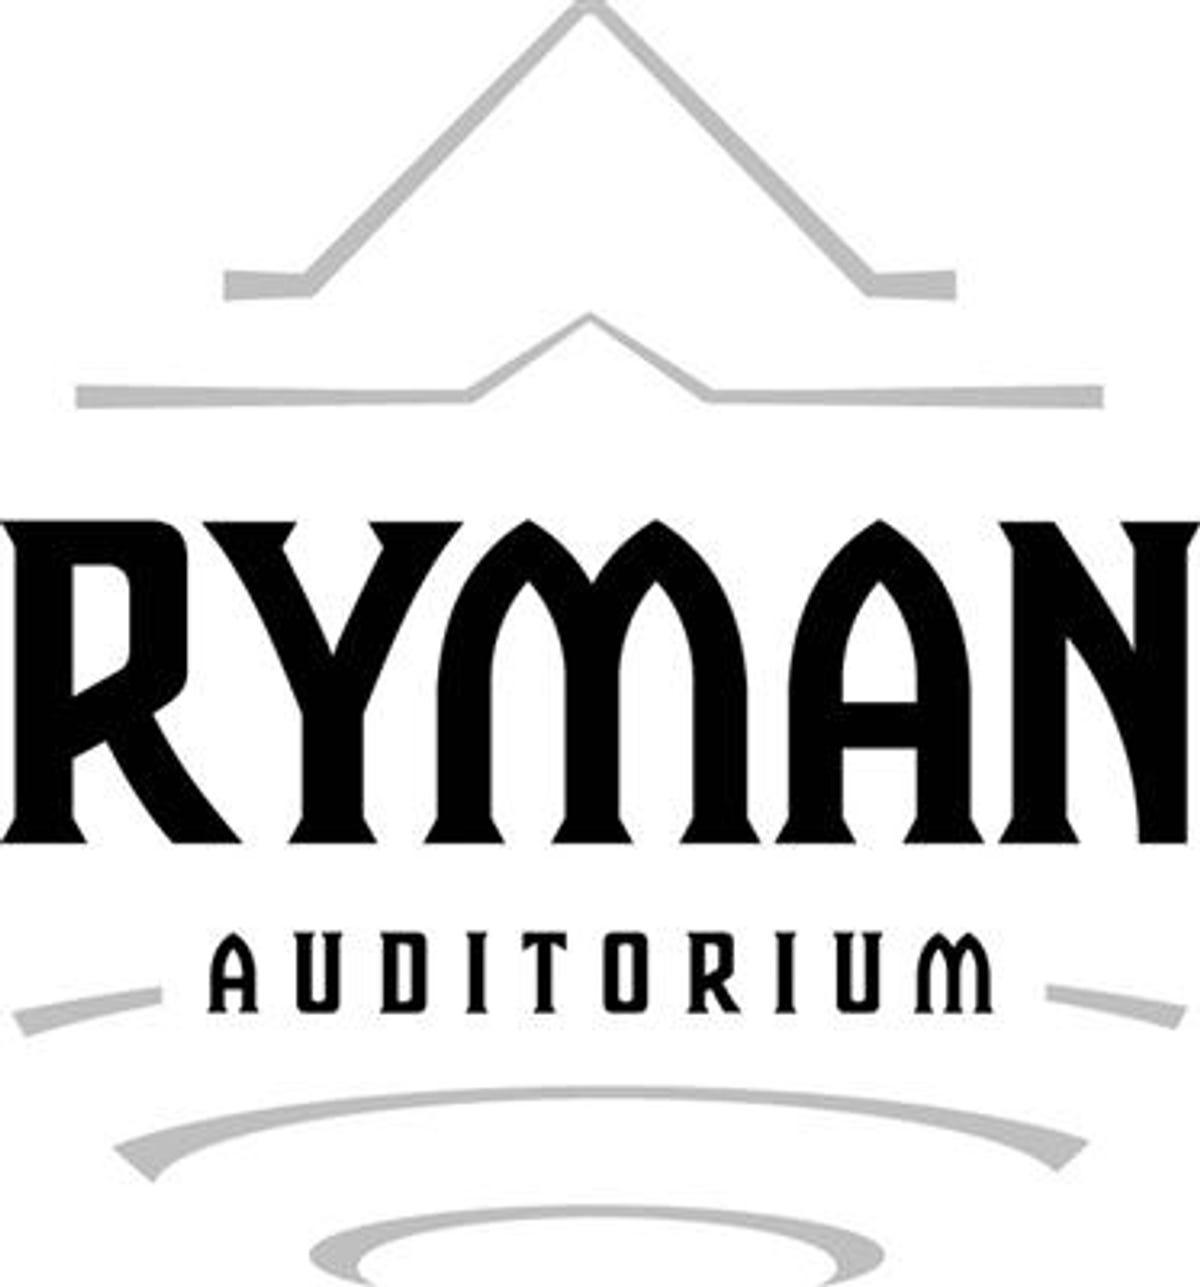 Ryman Logo - Grand reopening for Ryman Auditorium after $14M expansion